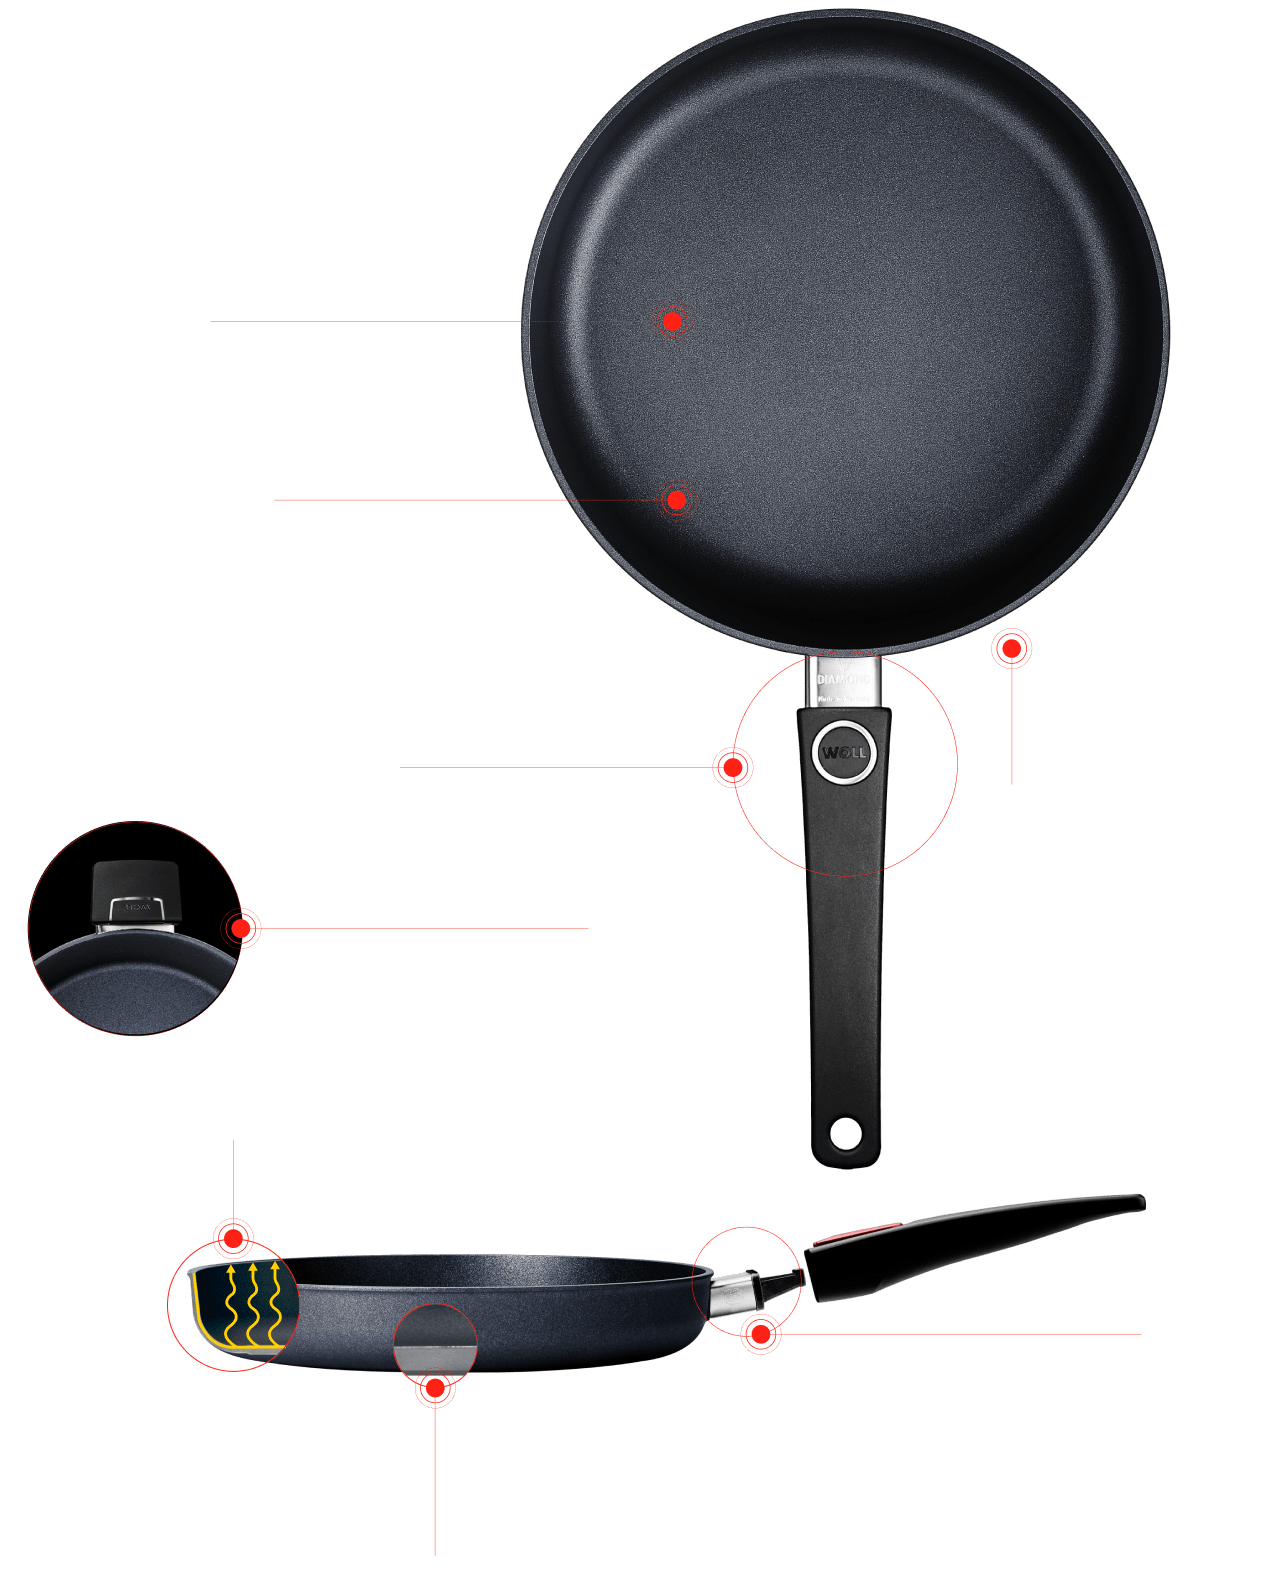 FRYPAN 28CM INDUCTION, WOLL DIAMOND LITE Woll - COOKWARE,FRYPANS